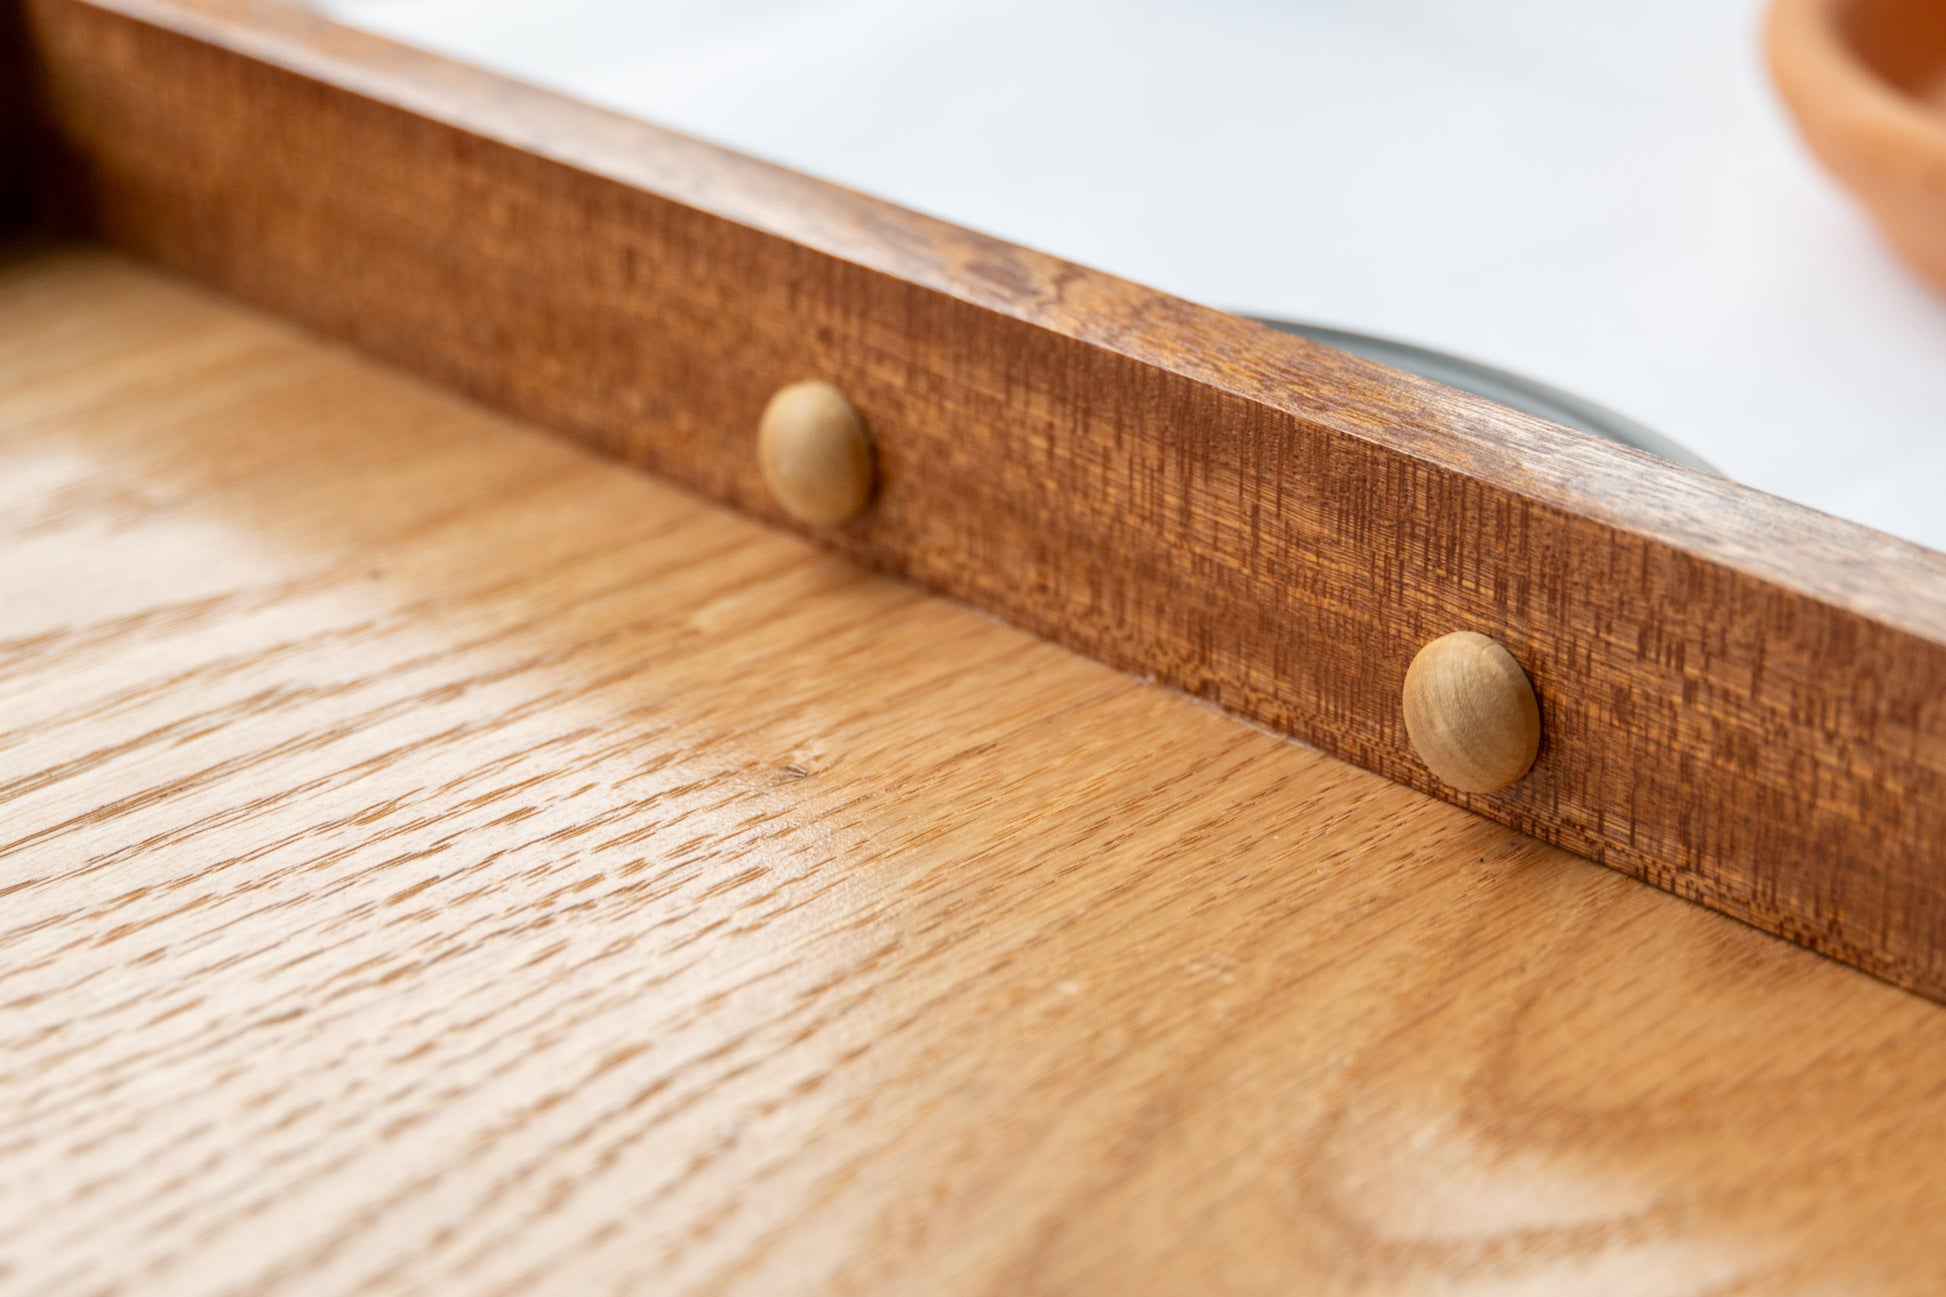 A close-up of the mahogany lip of our Luxury Serving Tray with Full Grain Leather. The dark mahogany wood elegantly meets the light oak wood that makes up the base of the tray. Two oak buttons protrude slightly on the inside of the serving tray to offer safe handling with the dark brass handles. 